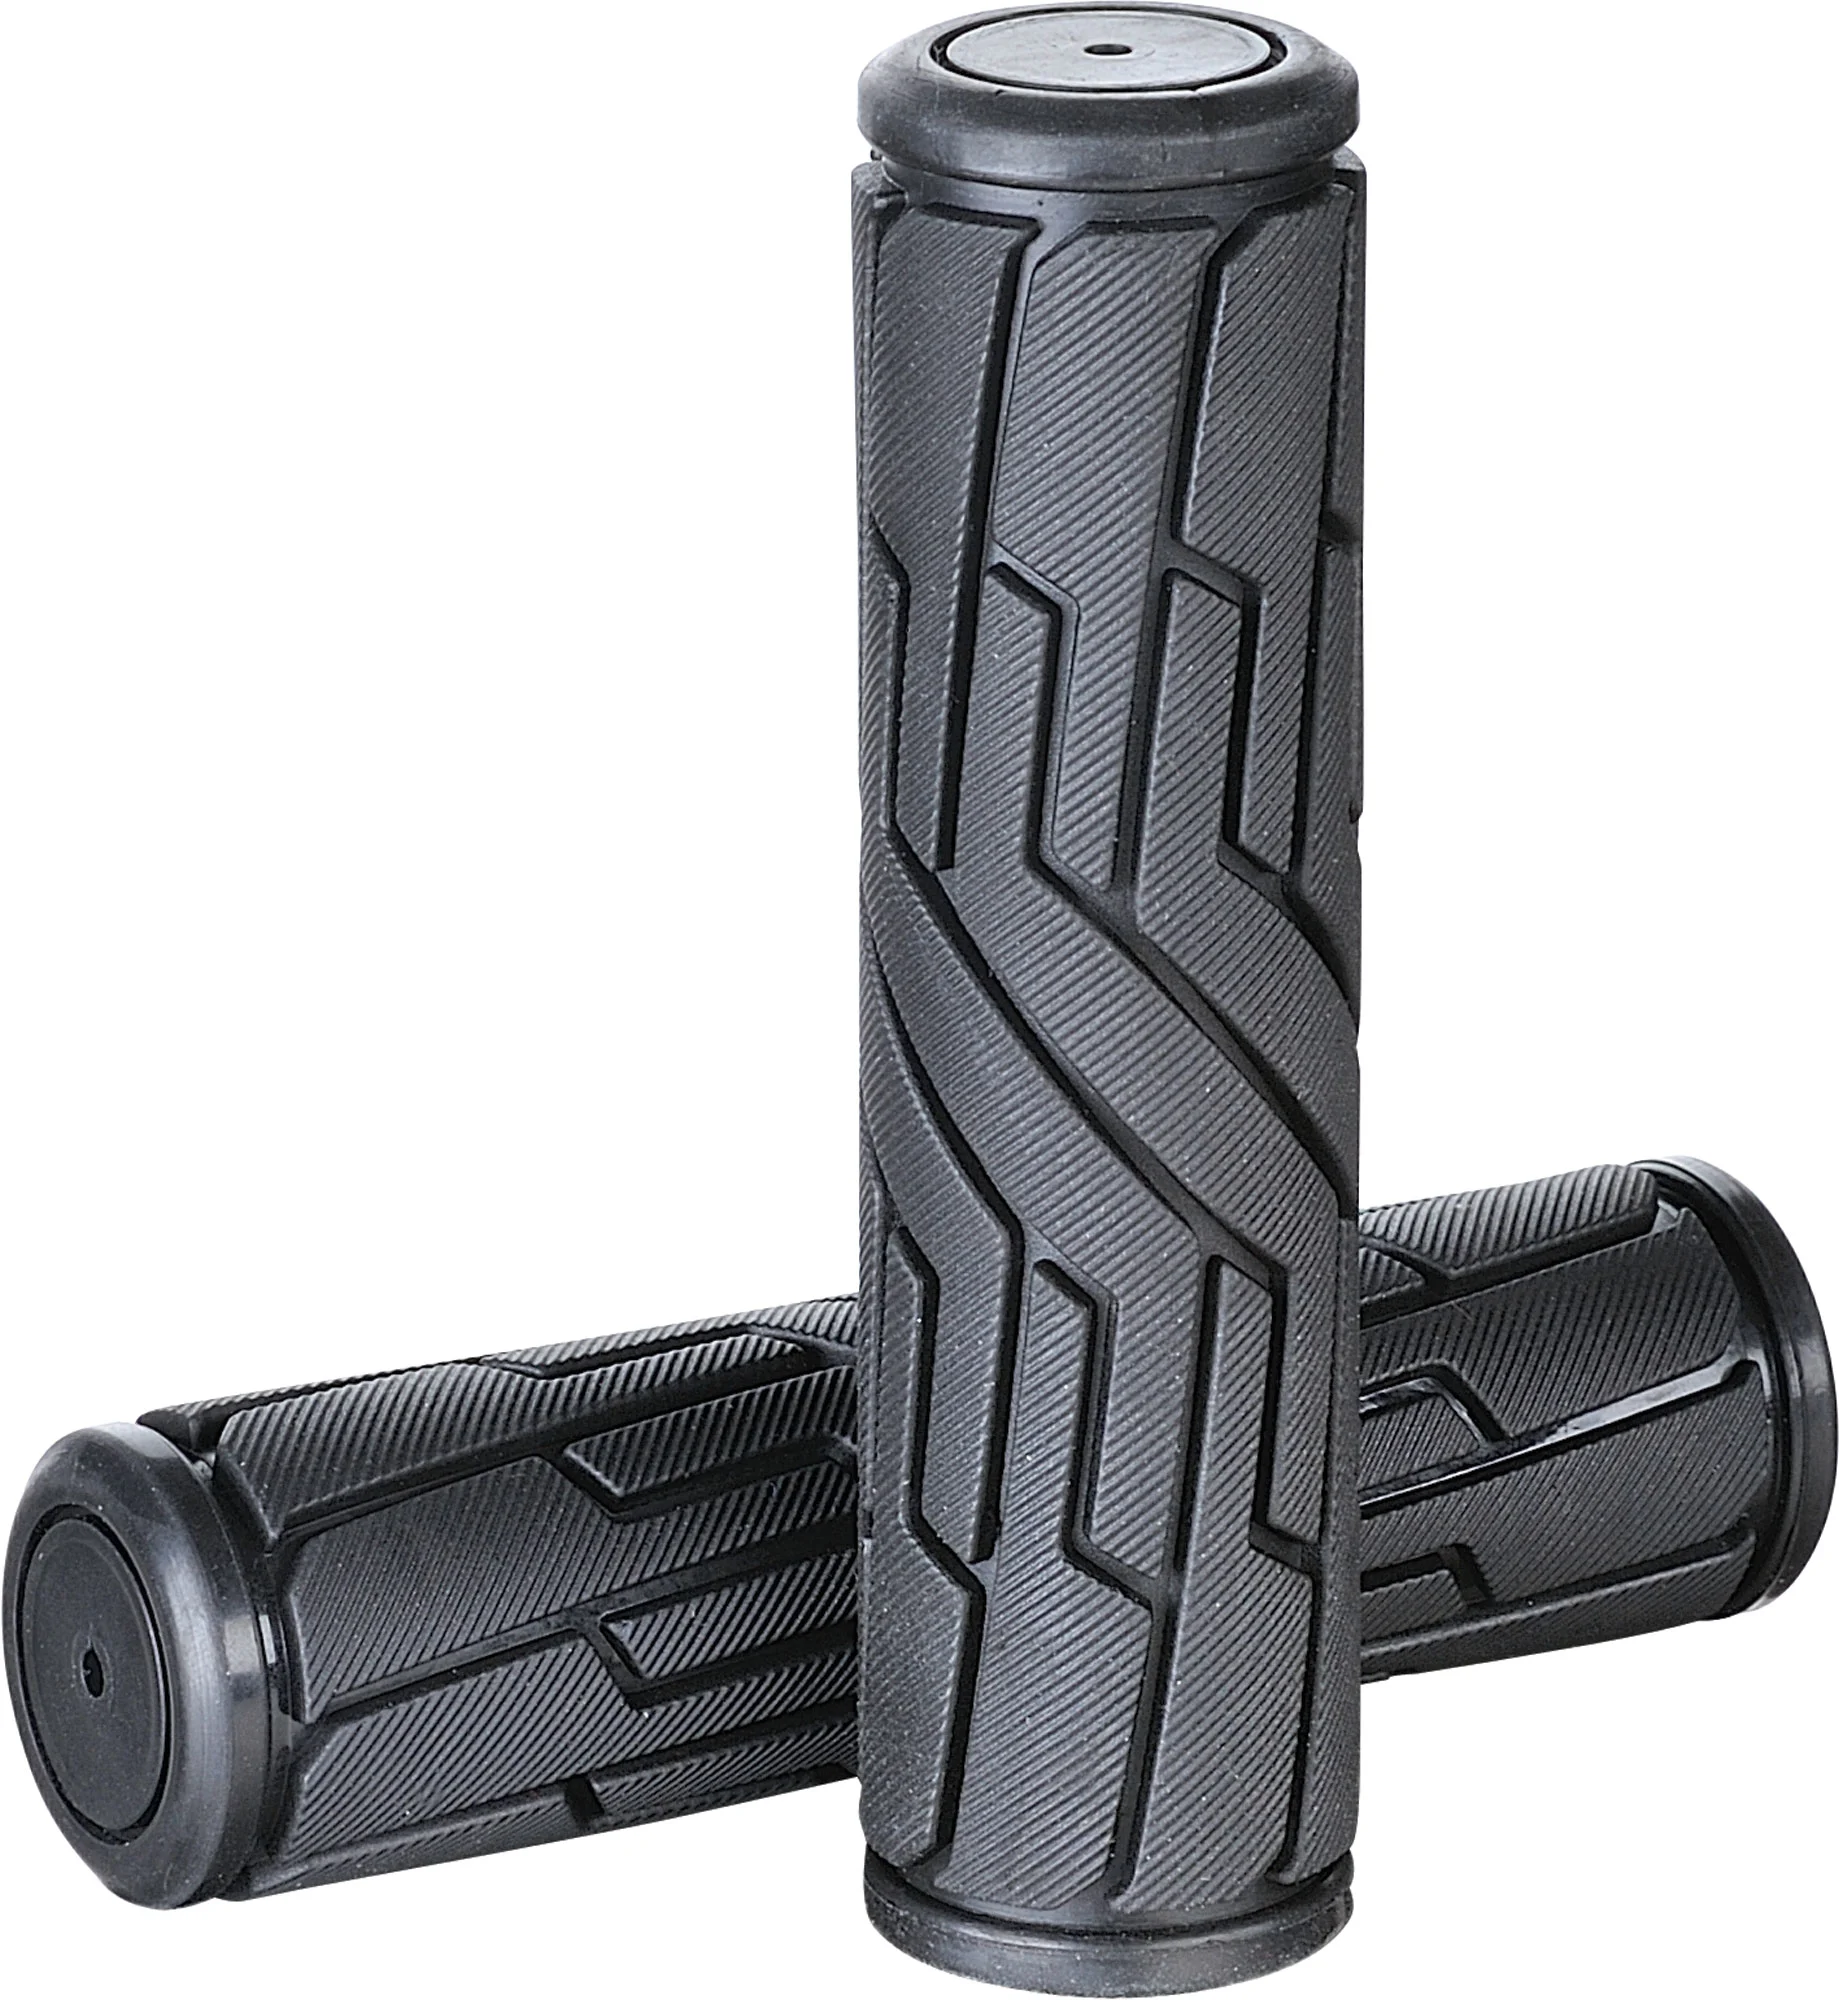 UNIVERSAL RUBBER GRIPS